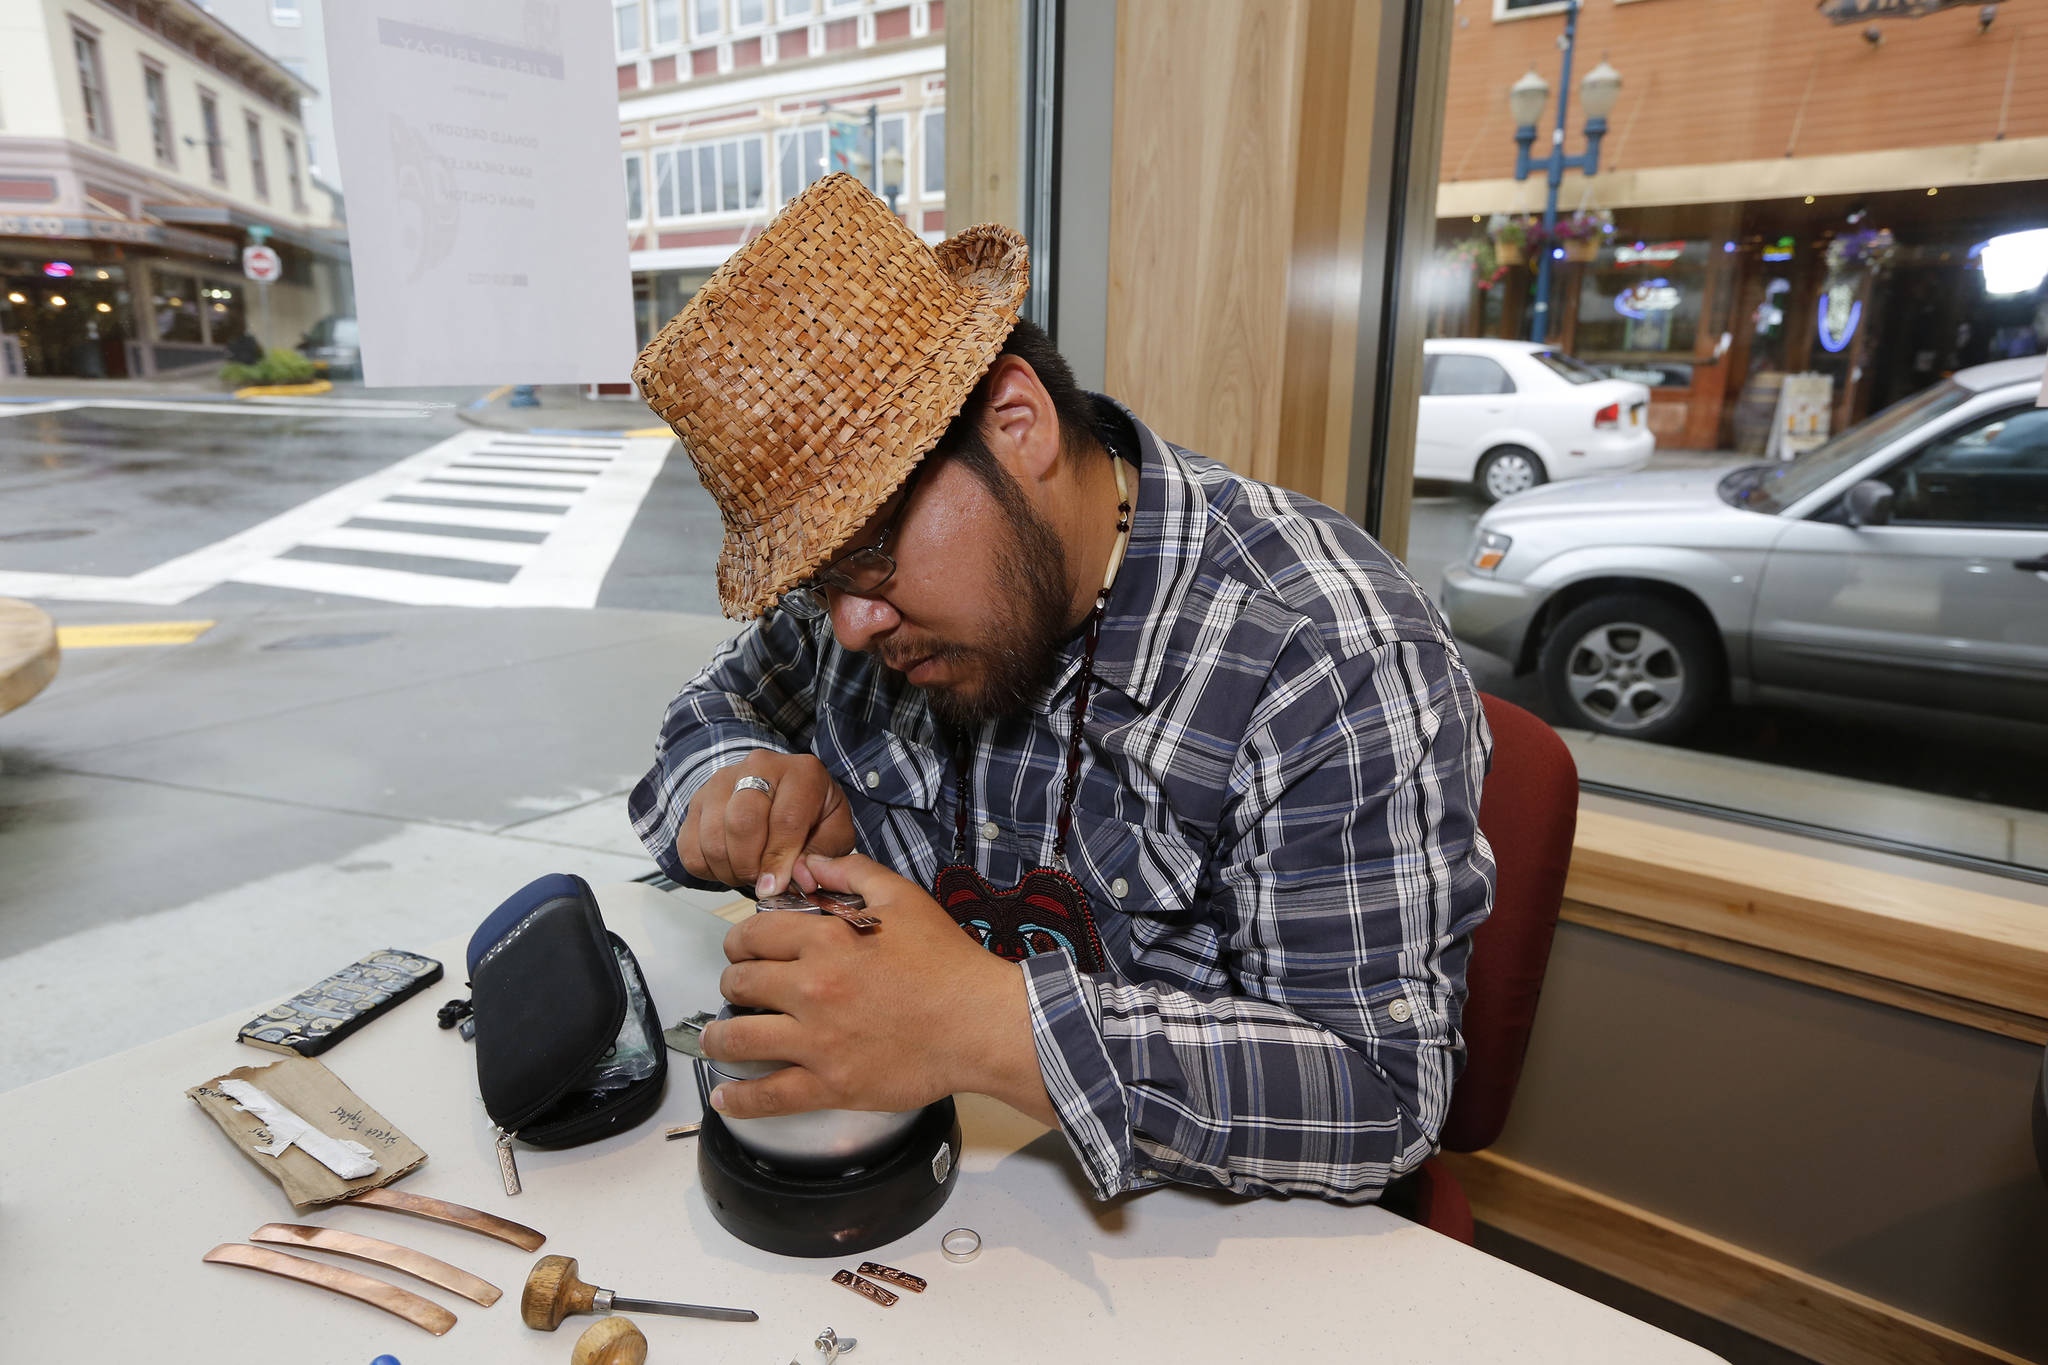 Samuel Sheakley, one of SHI’s featured artists for First Friday, works on a piece of jewelry. Photo by Brian Wallace.